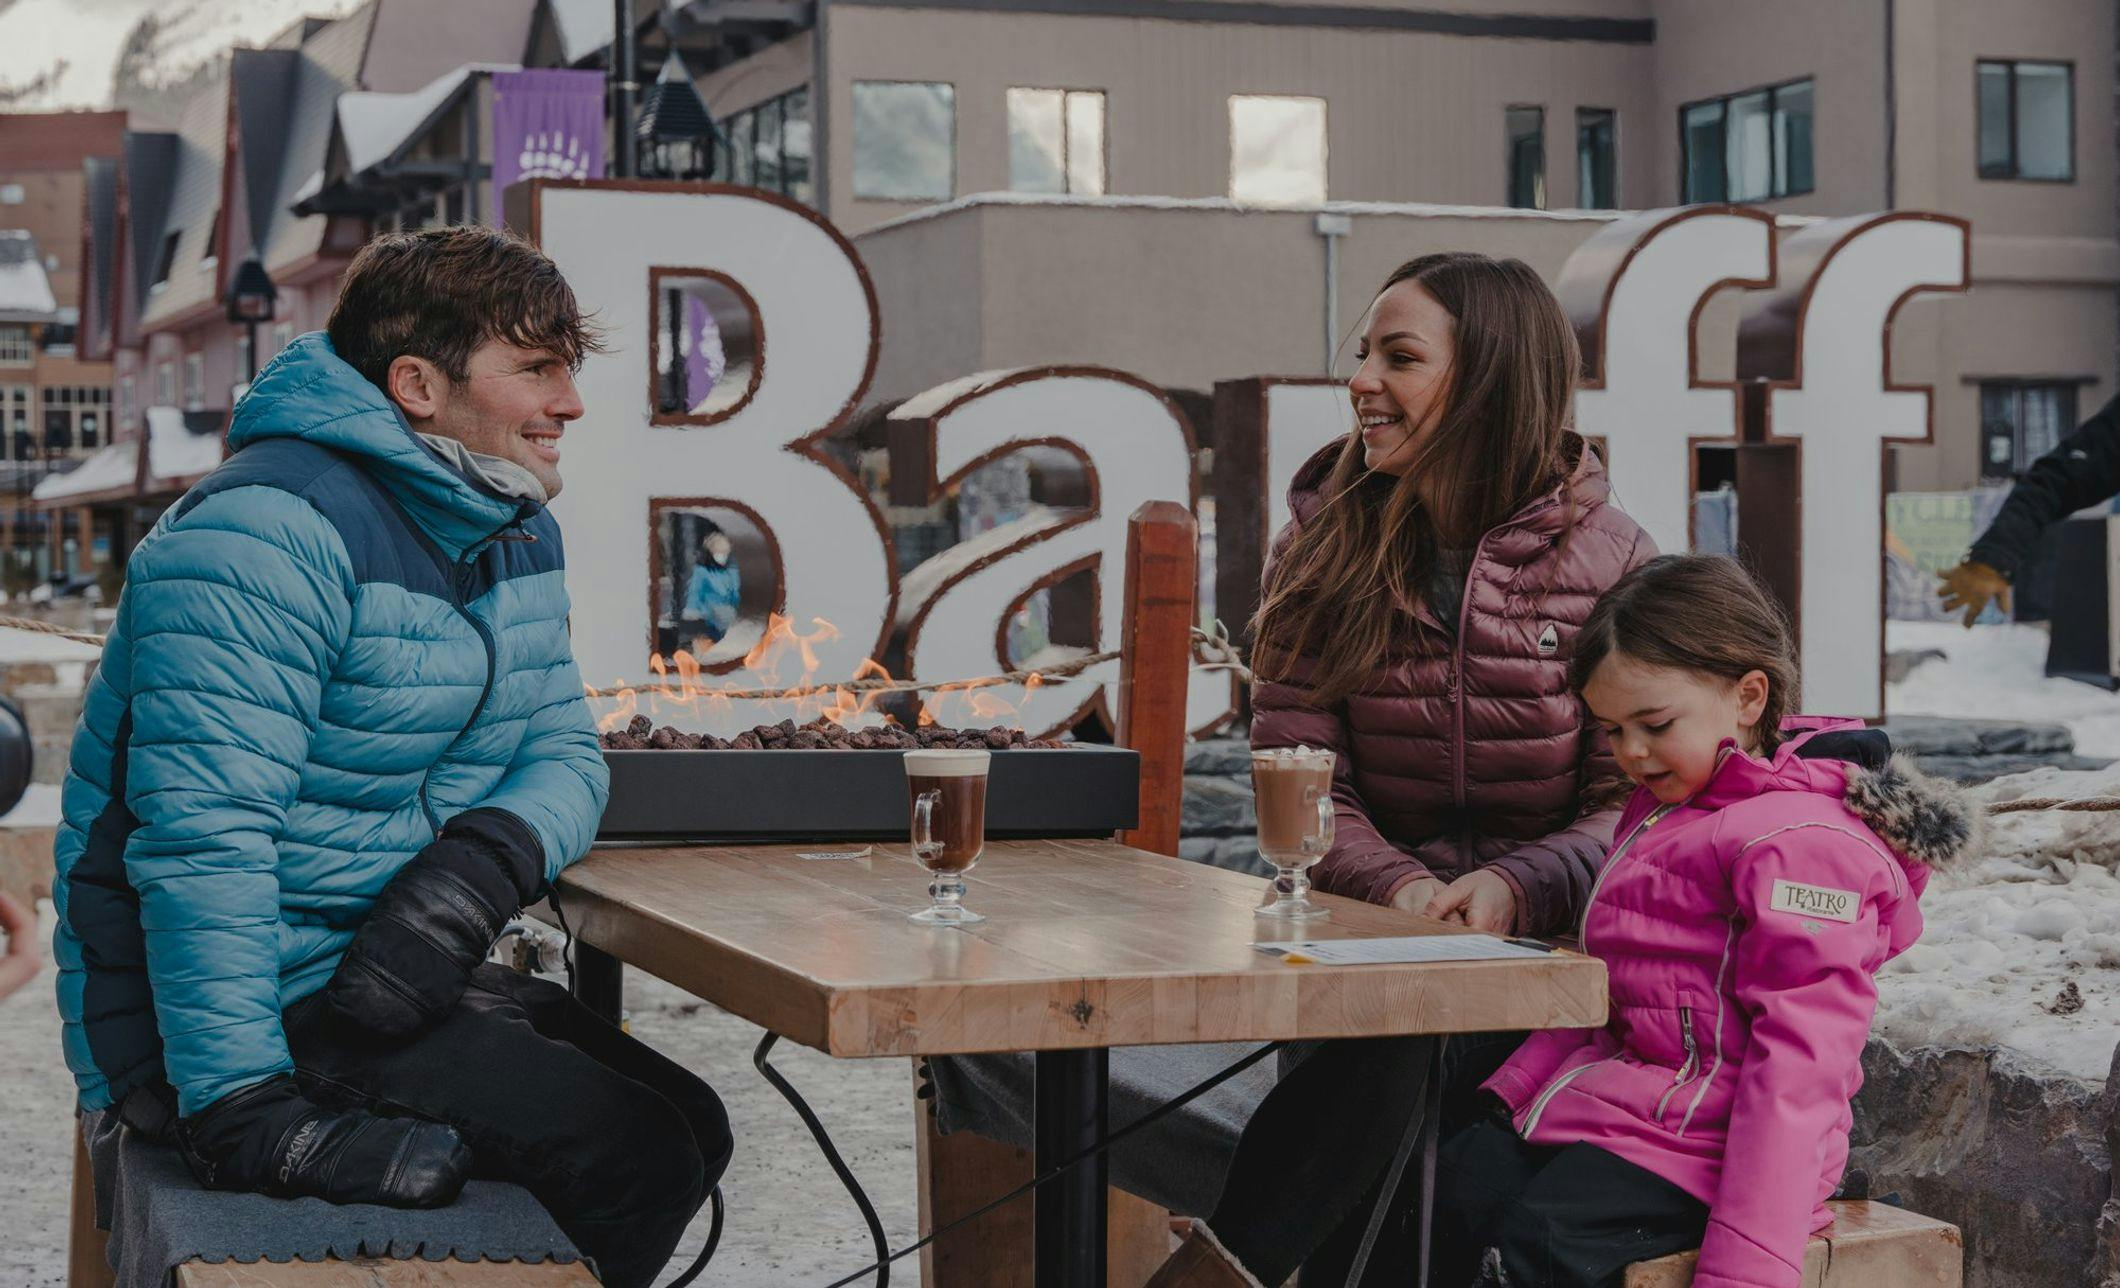 A family of three sit at an outdoor table enjoying hot chocolate and pizza with their three dogs. Everyone is bundled up for the winter weather